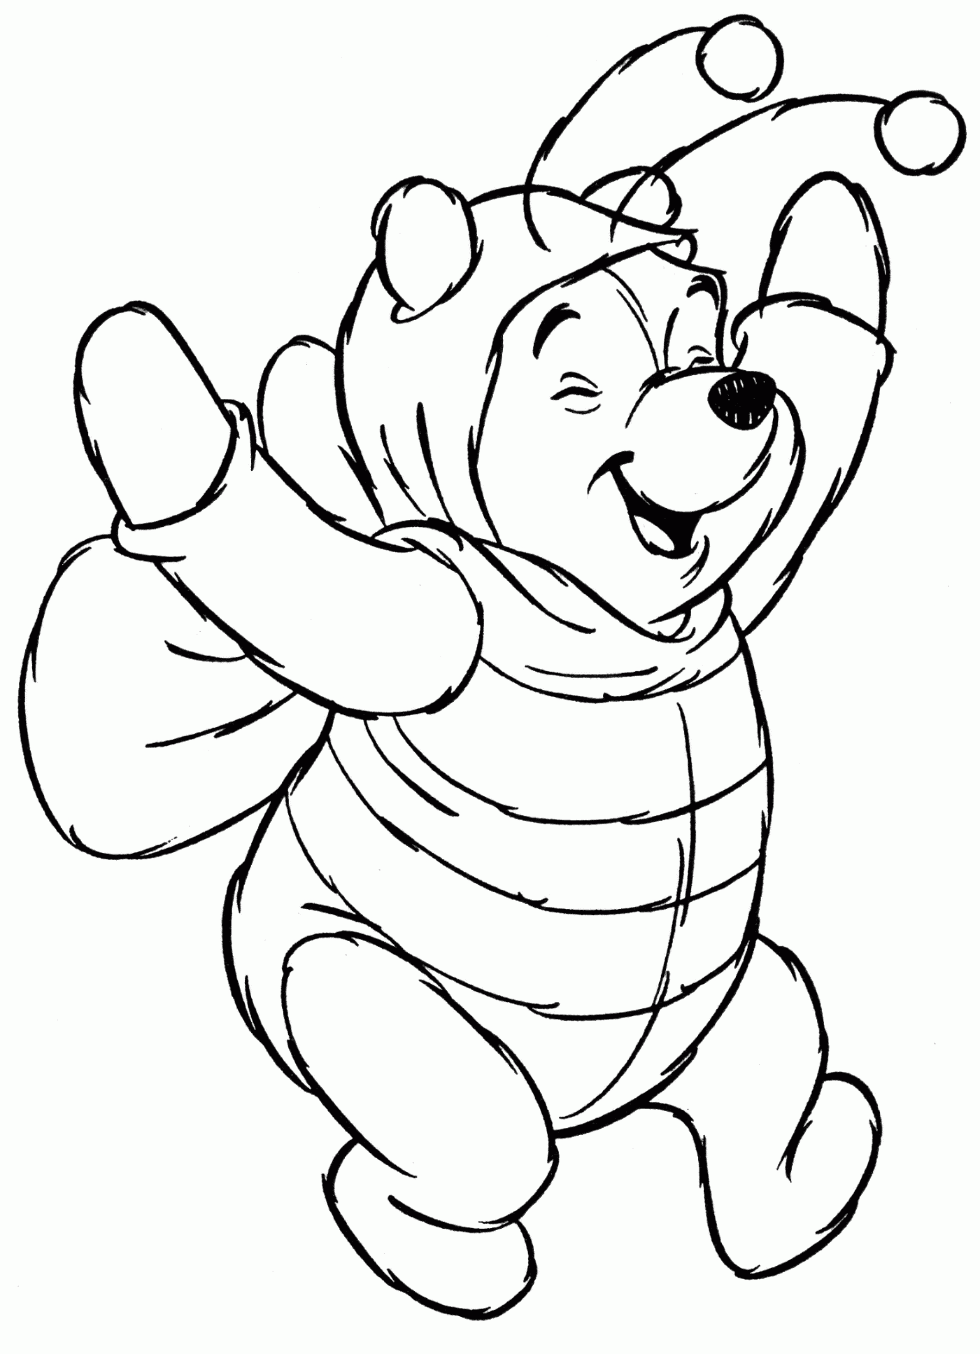 Poohs Bee Costume Coloring Page